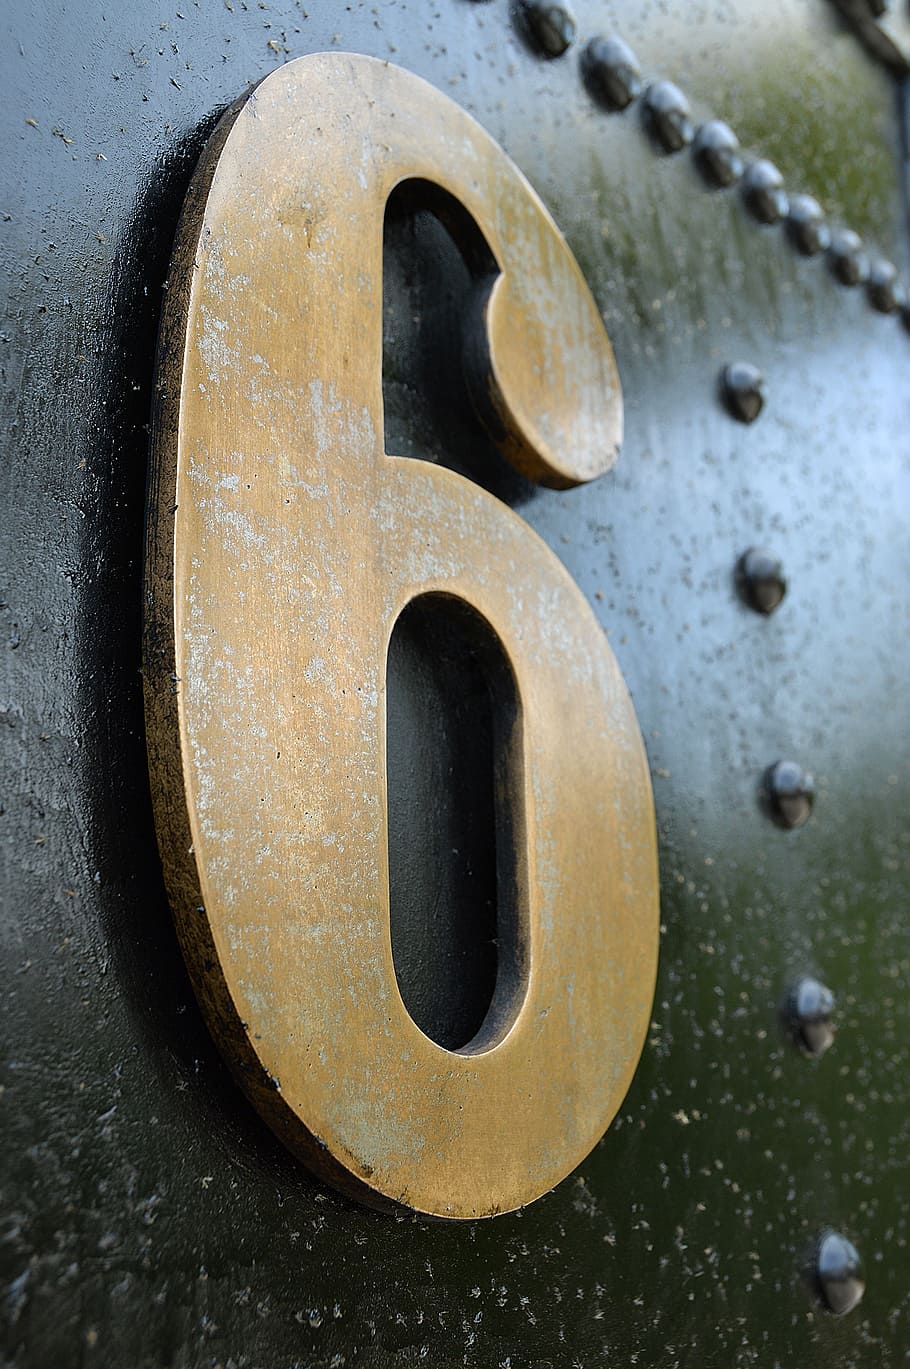 number, old, metal, weathered, surface, texture, rust, copper, 6, close-up